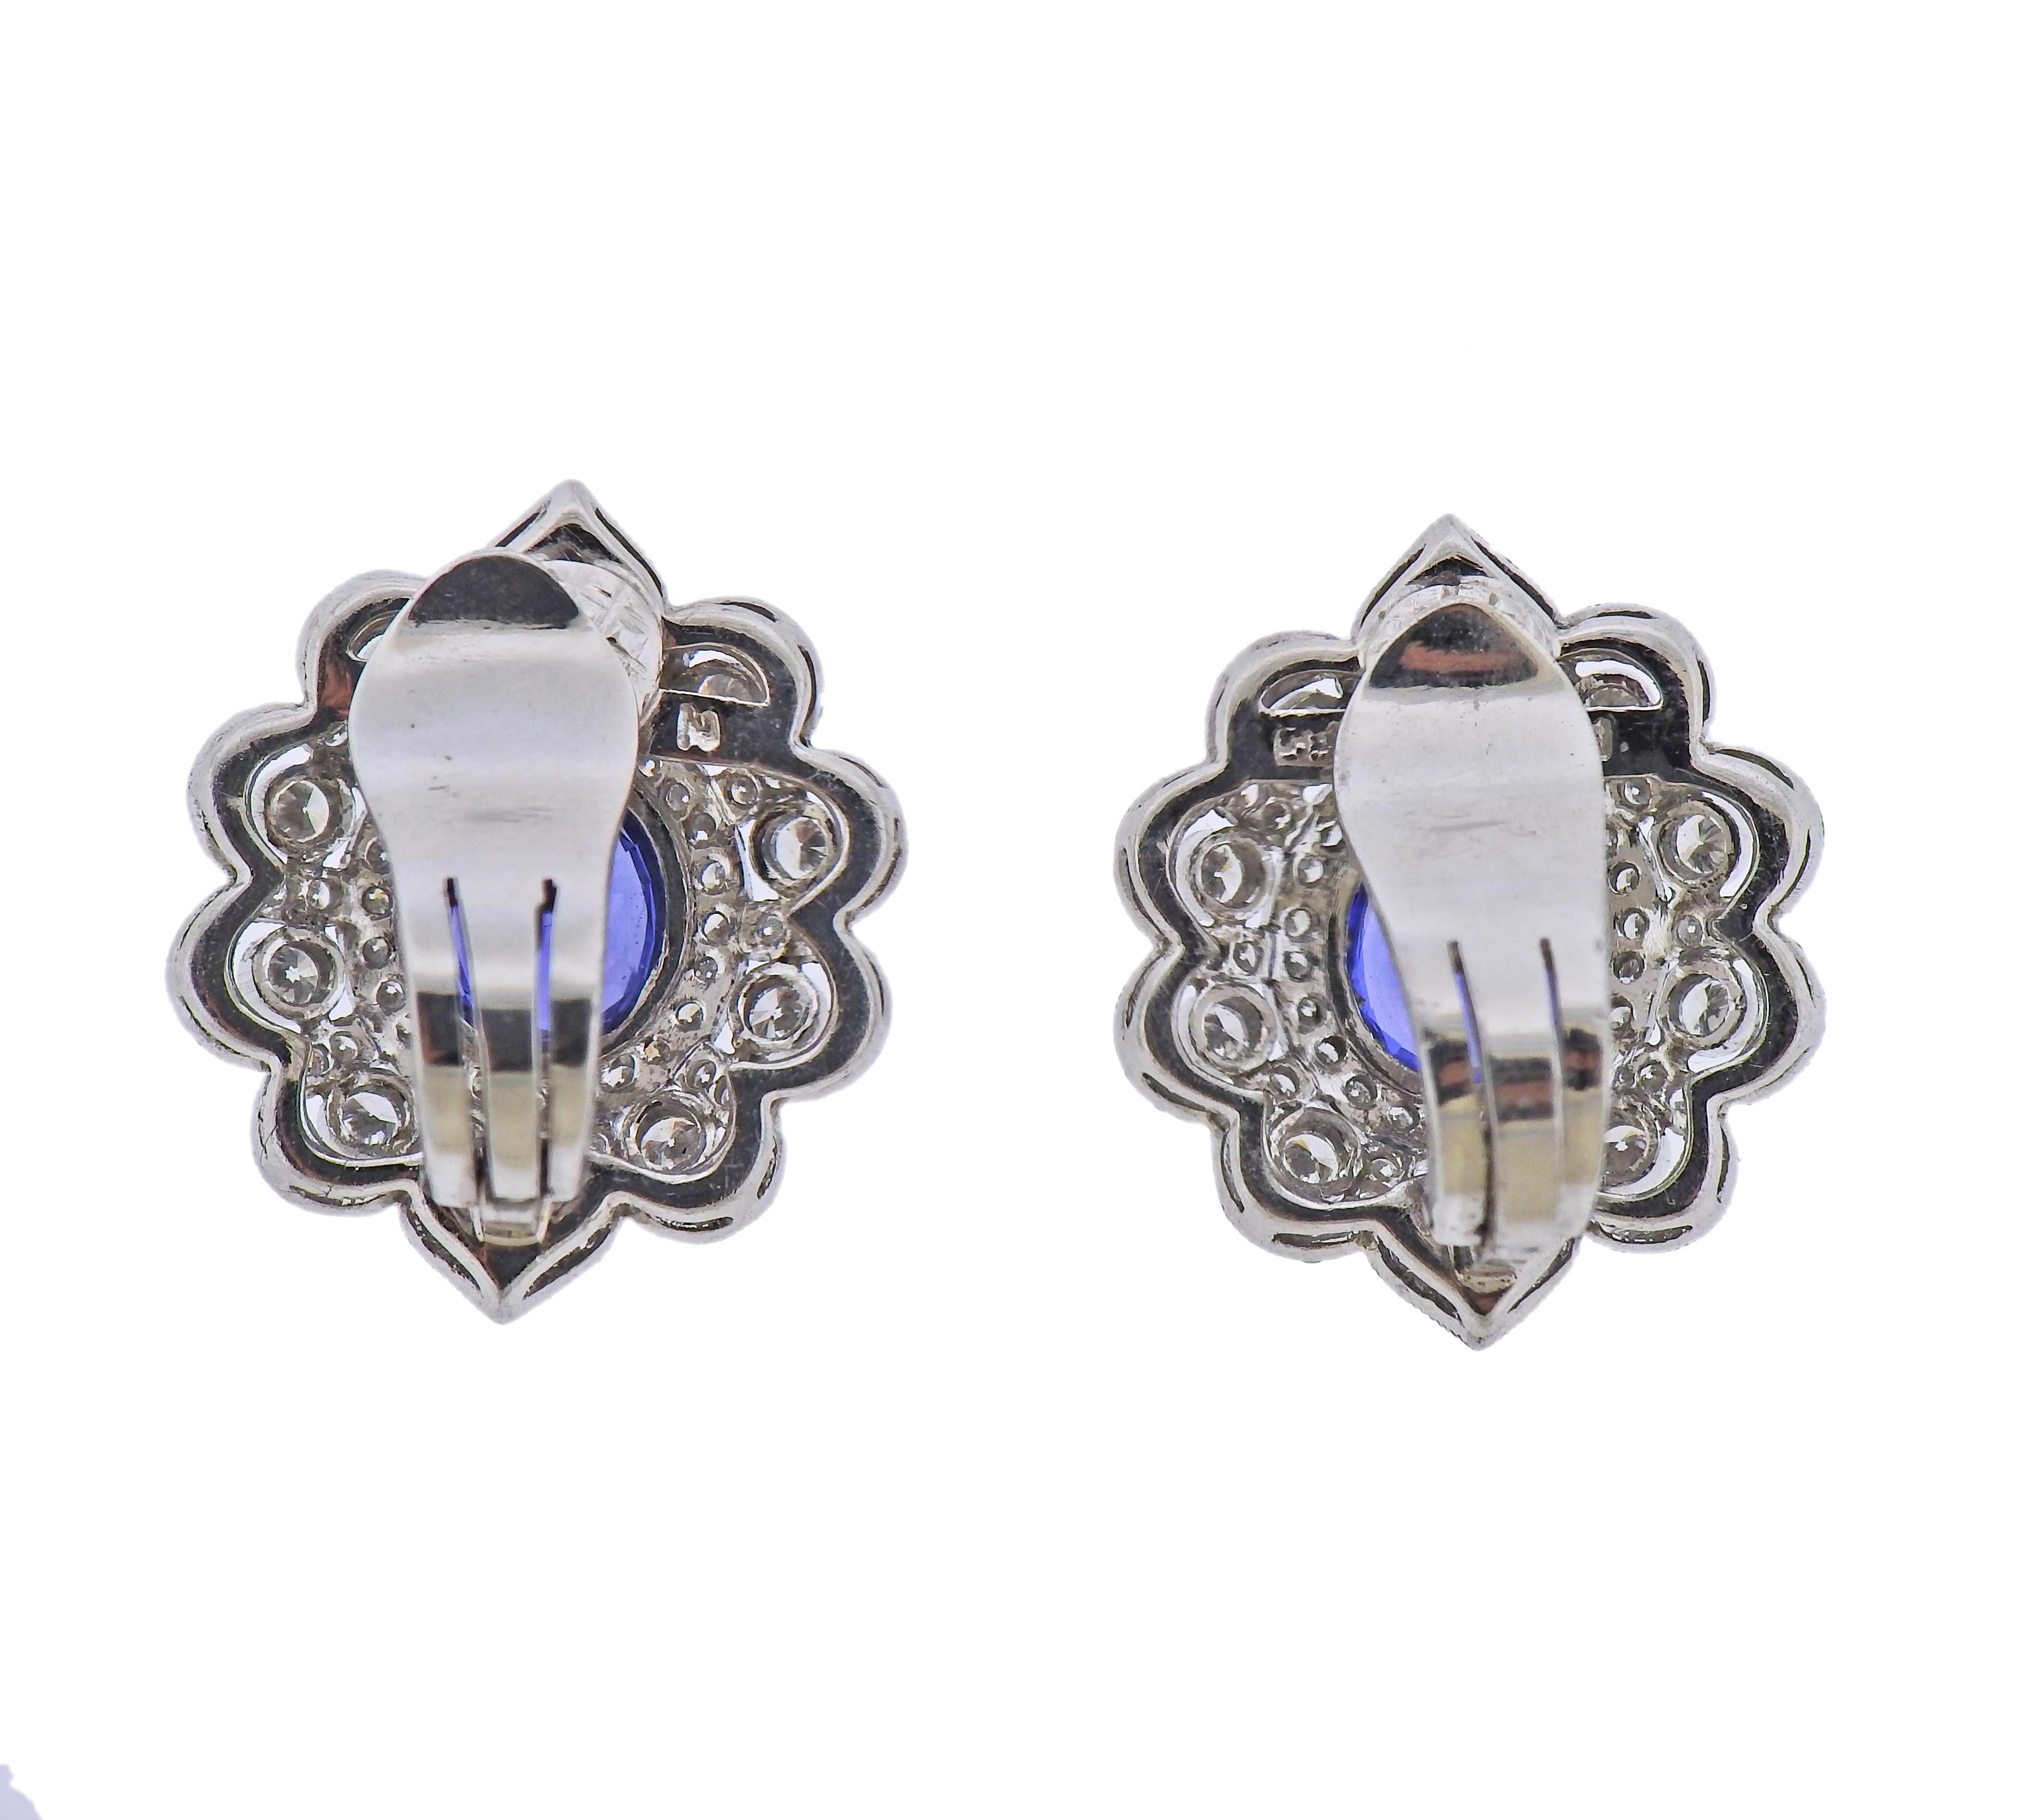 Pair of 14k white gold earring, set with blue sapphires and approx. 1.40ctw in diamonds. Earrings measure 22mm x 20mm. Marked 585, N. Weigh - 10 grams.